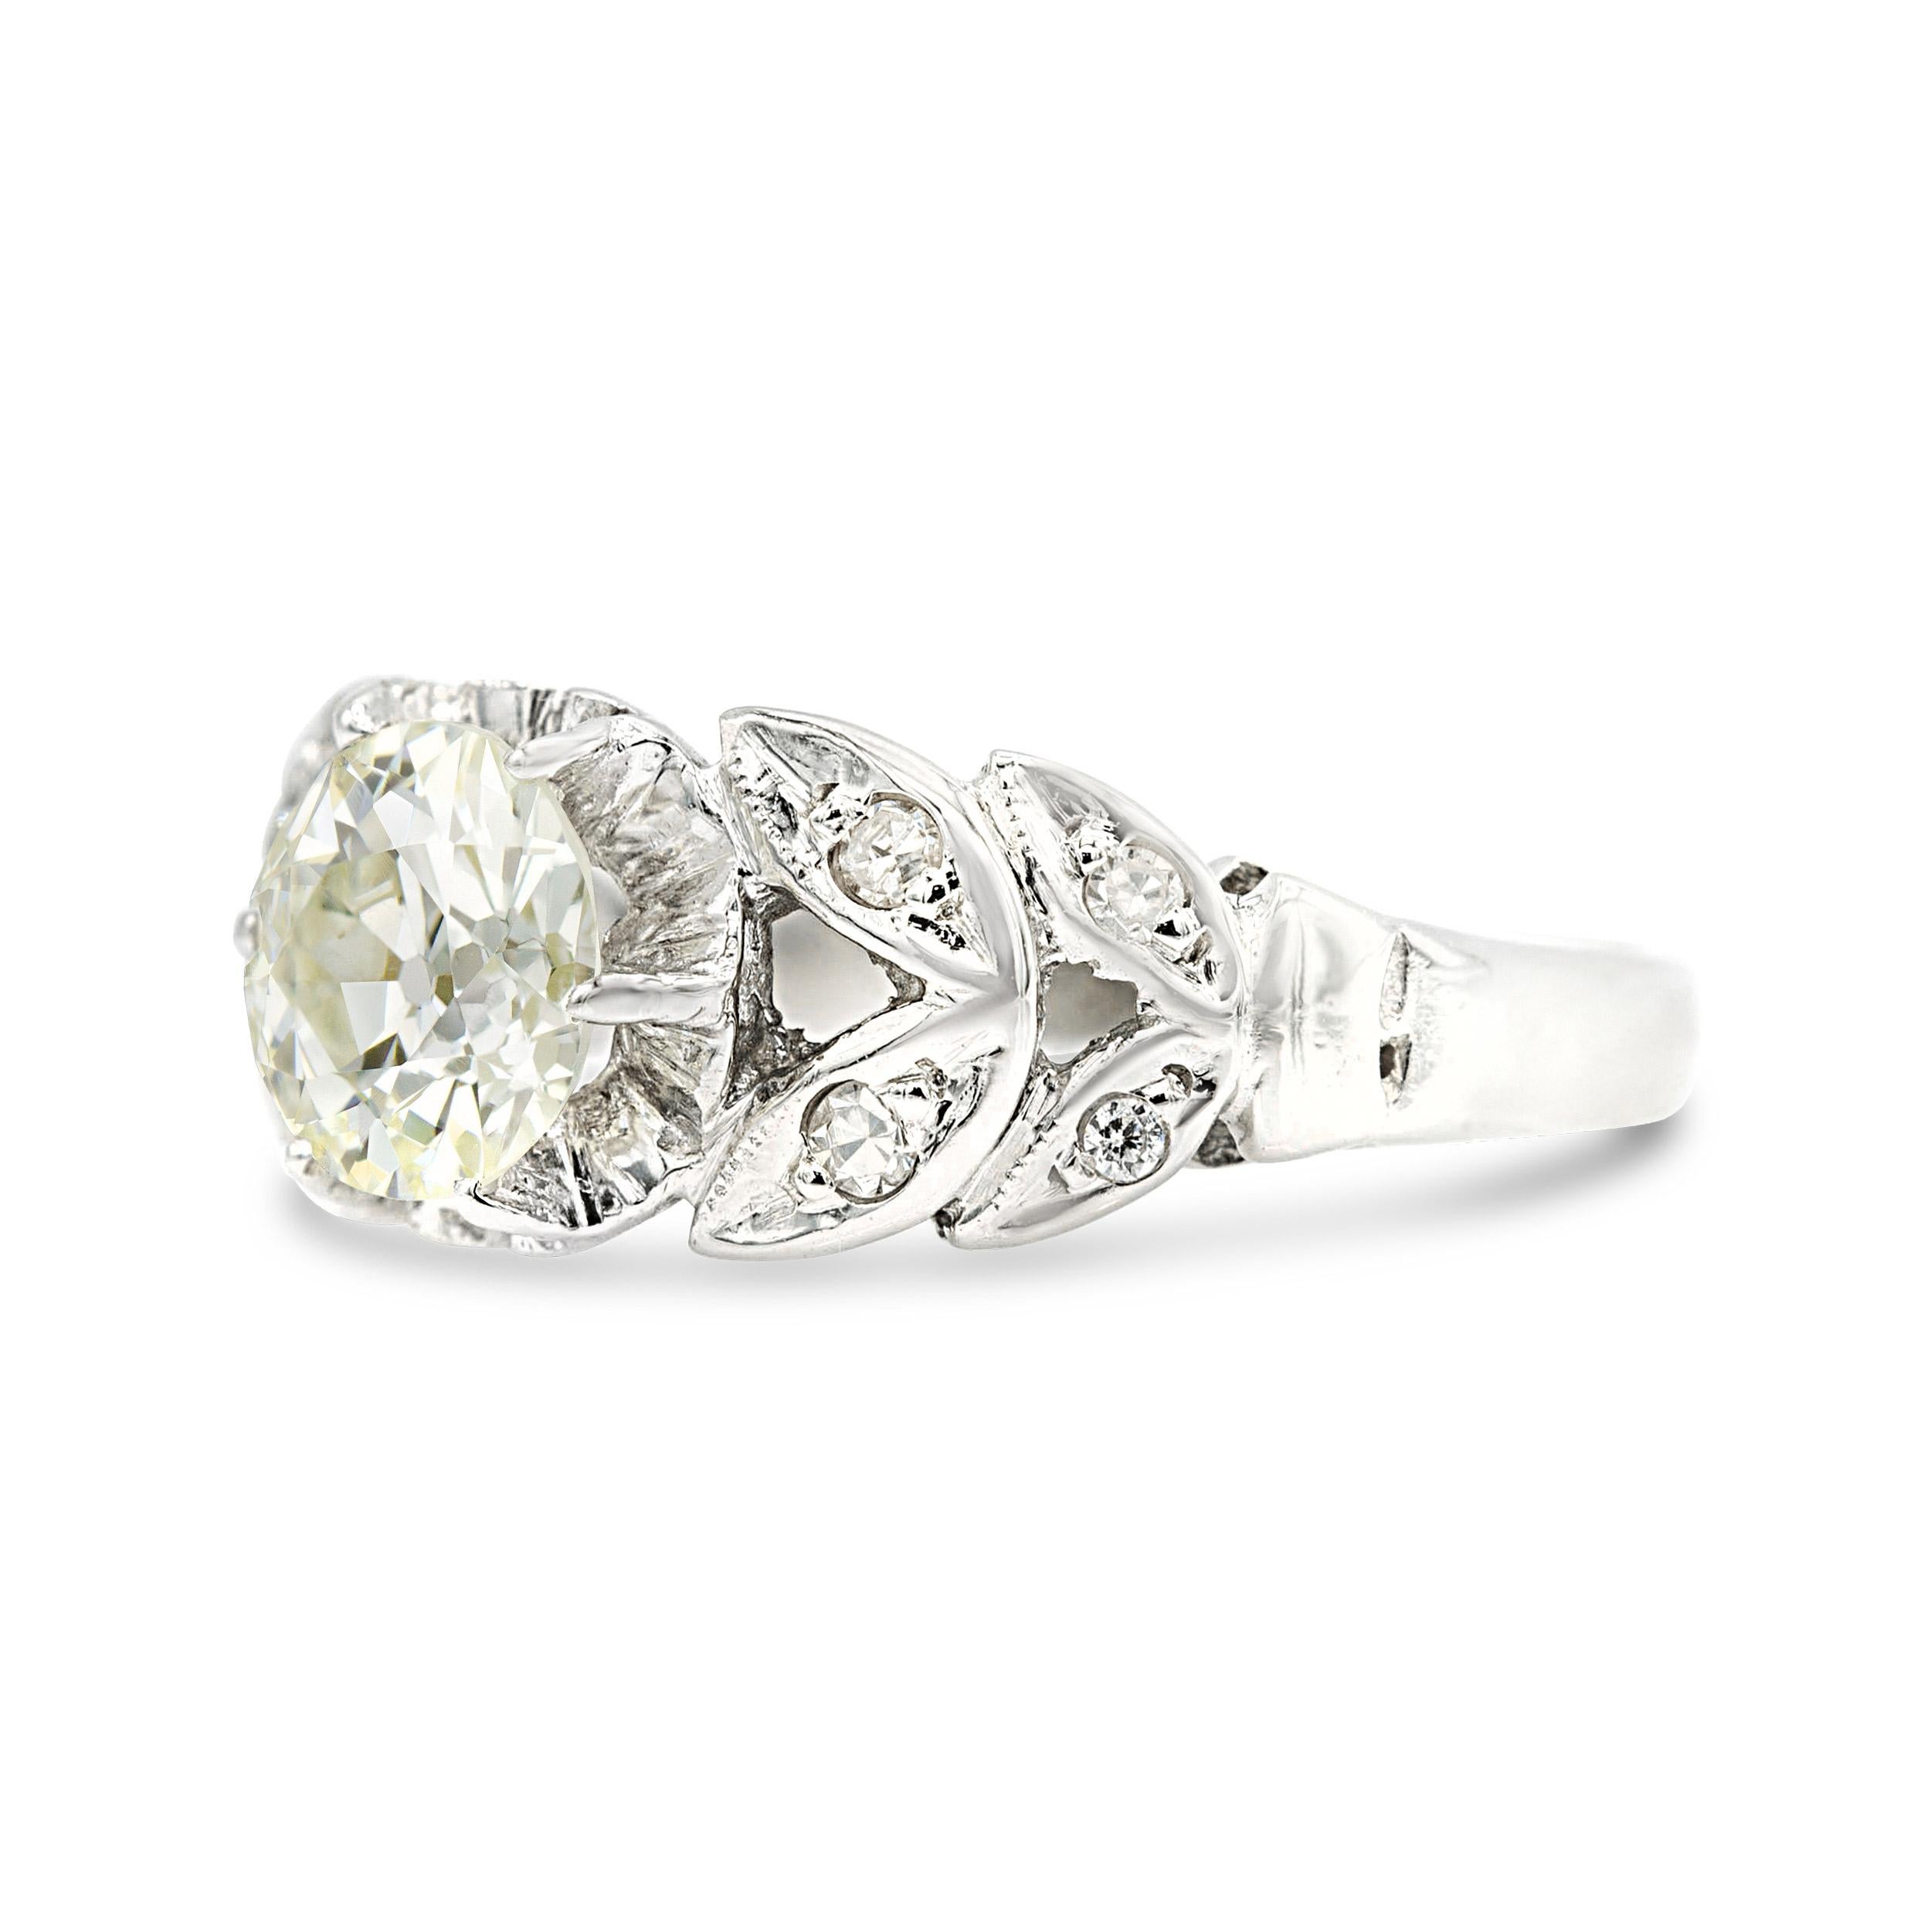 A beautiful and unique engagement ring by any standard, this Edwardian beauty stands out with its split shoulders and diamond-studded leaf motif design. The 0.96-carat center old European diamond weighs a touch under 1 carat but spreads as it weighs